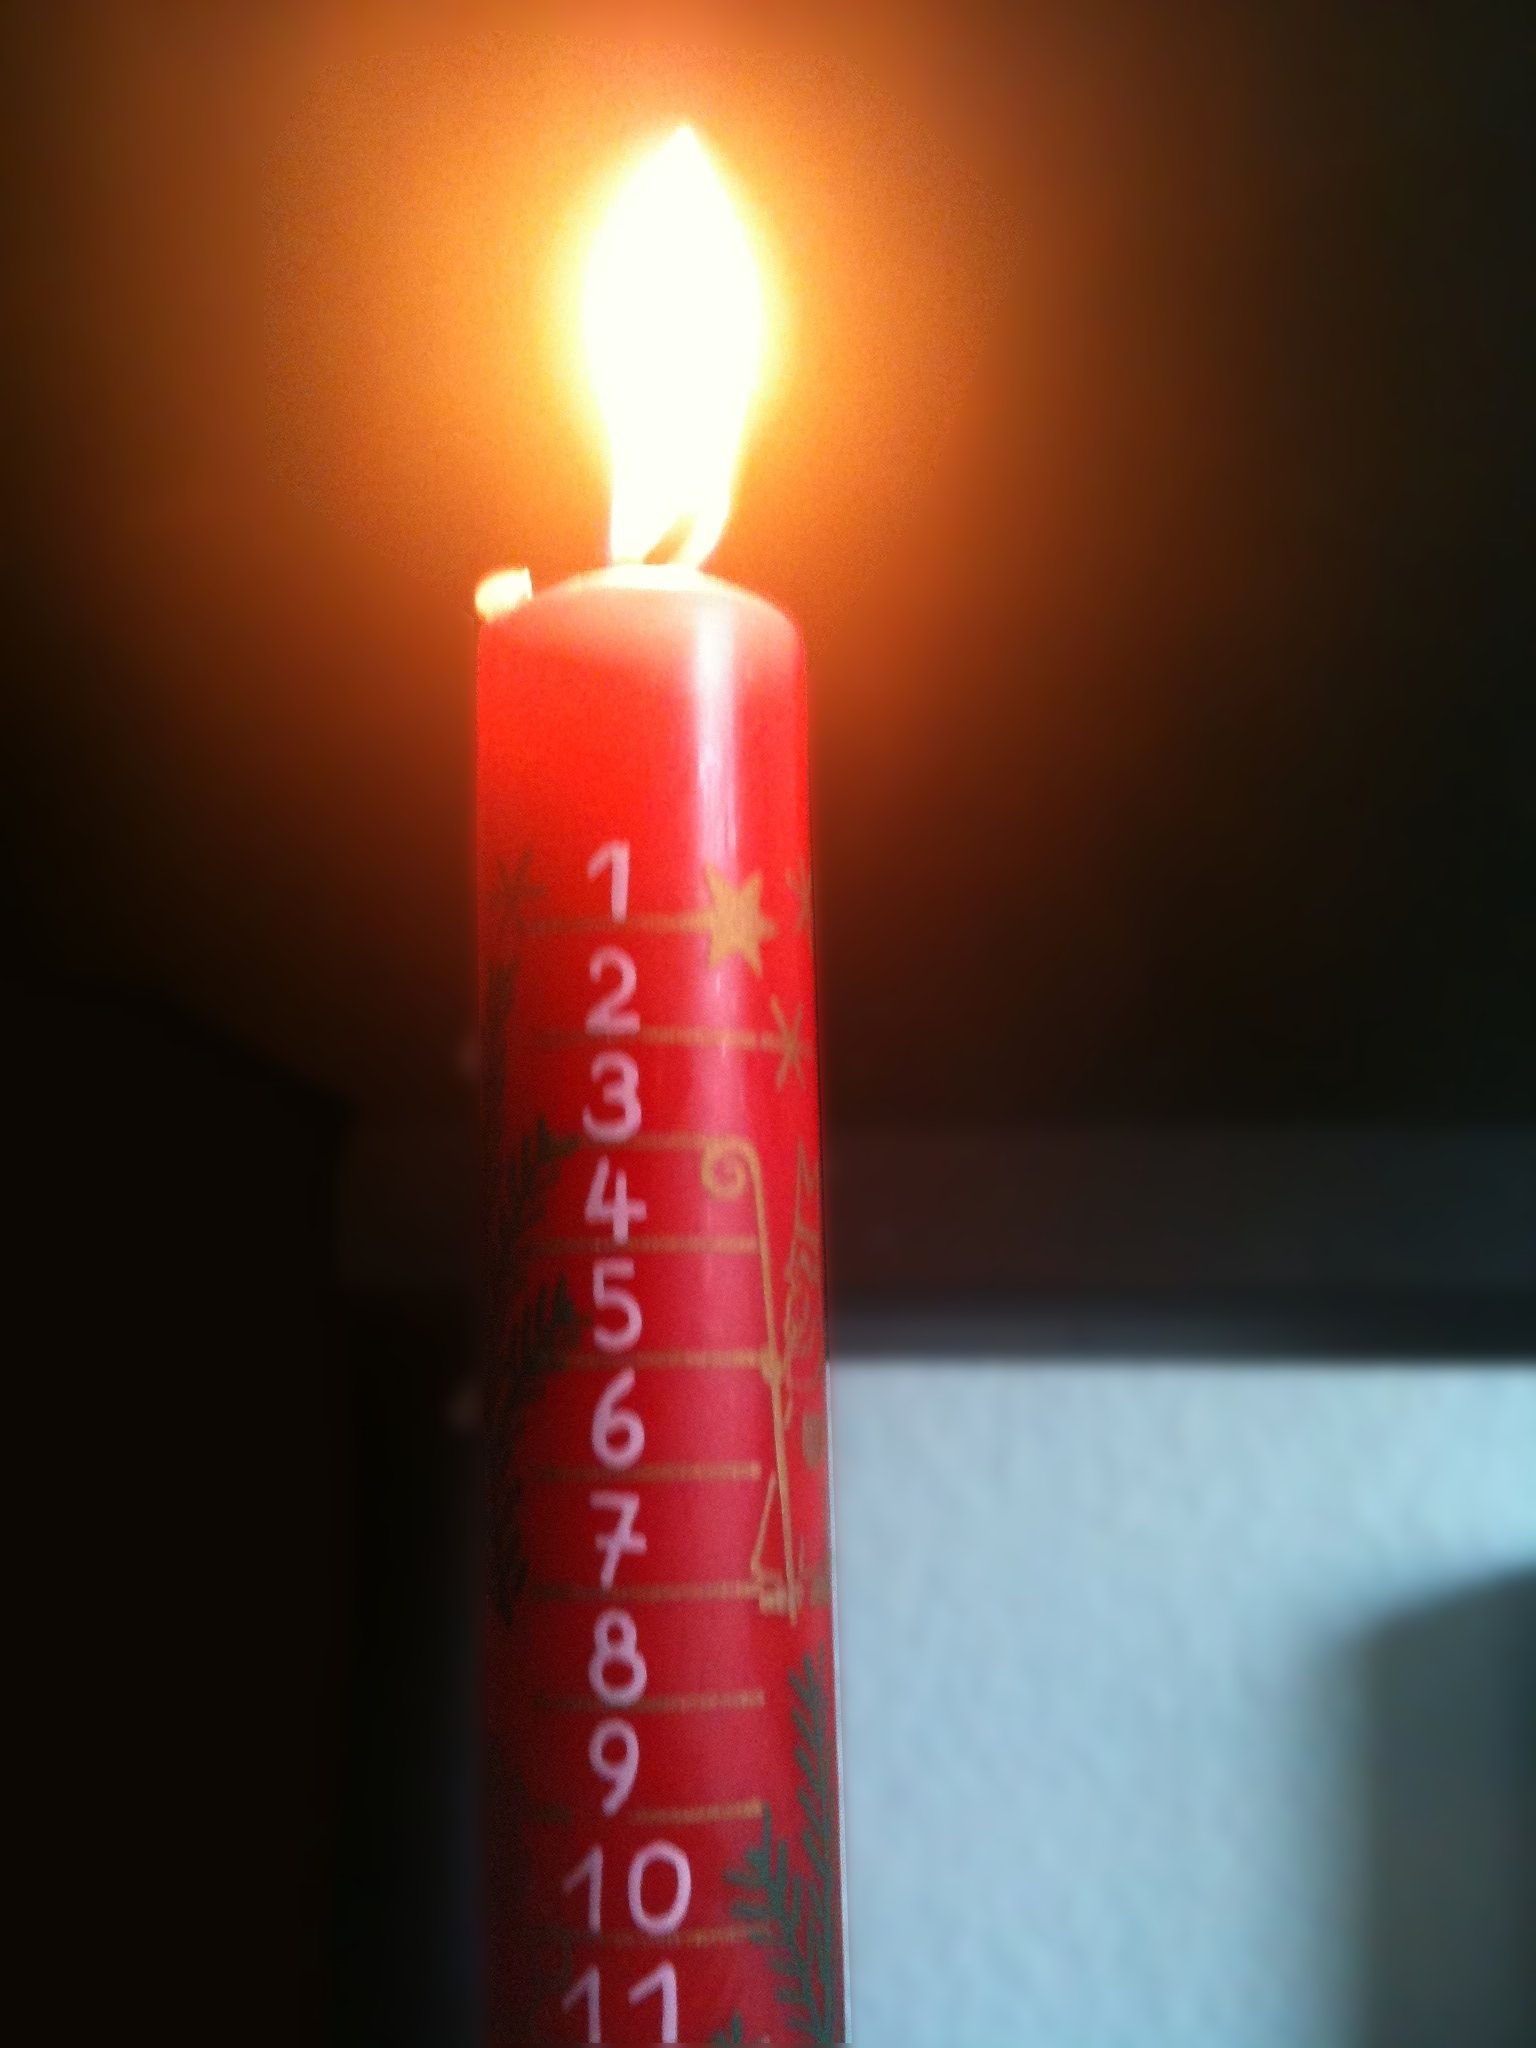 http://upload.wikimedia.org/wikipedia/commons/6/62/Advent_candle_1.jpg